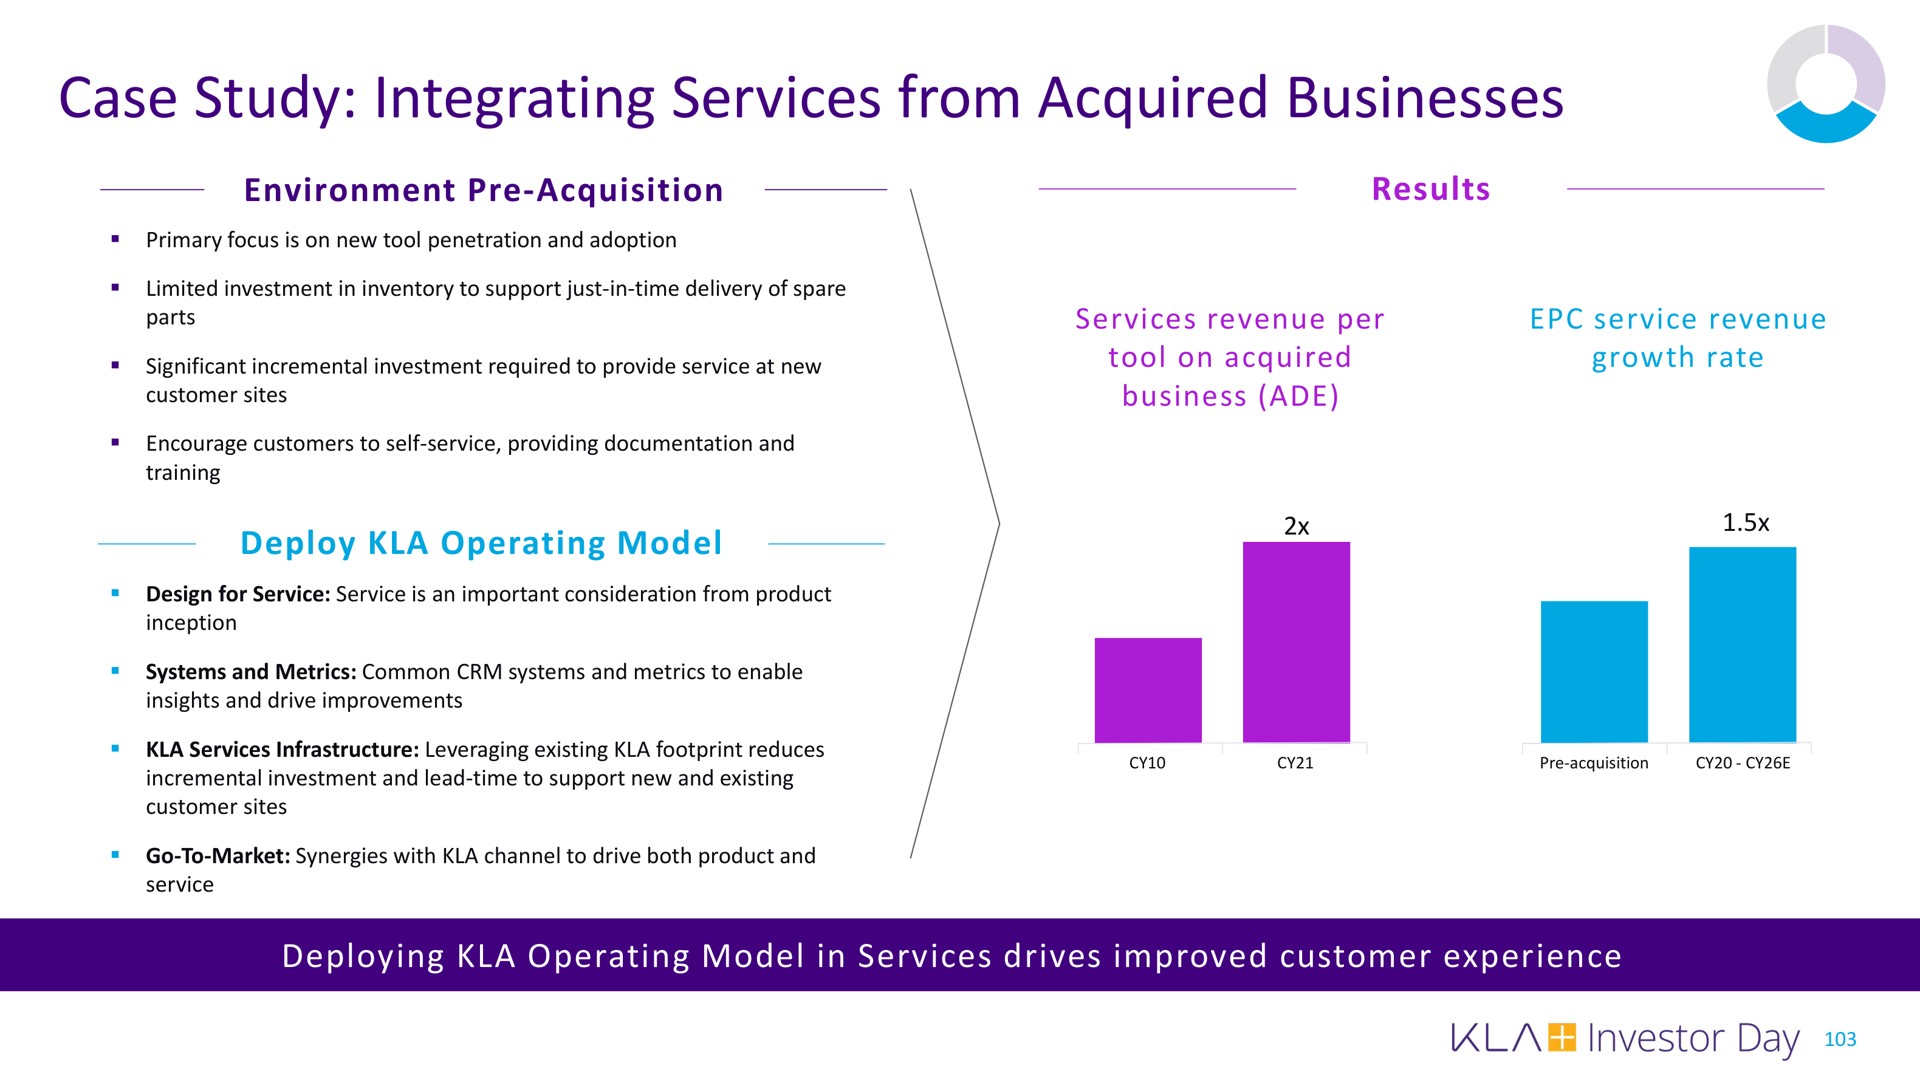 case study integrating services from acquired businesses | KLA